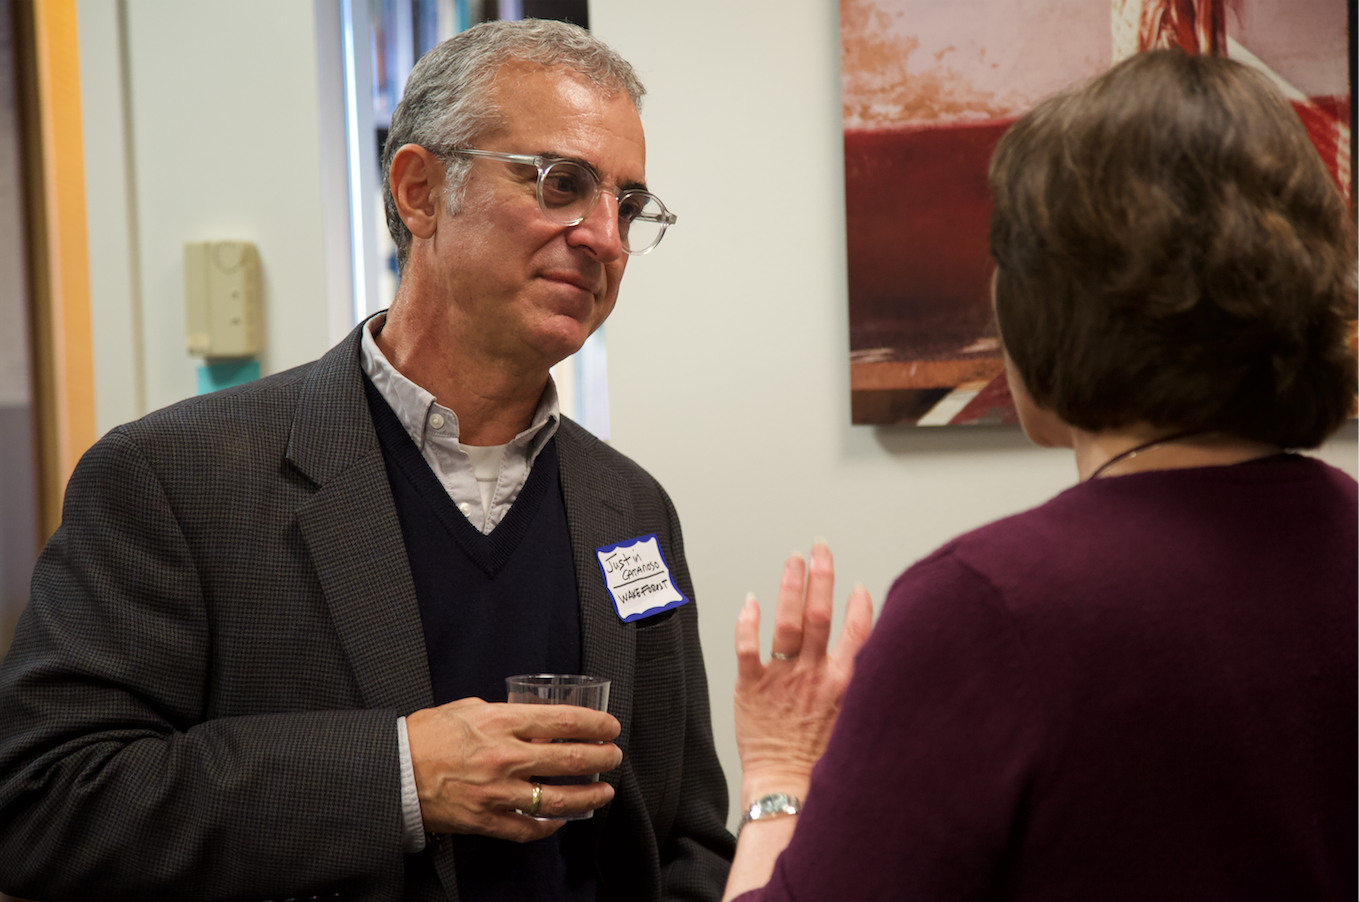 Justin Catanoso, journalism professor Wake Forest, chats with Ann Peters, university and community outreach director at the Pulitzer Center, during lunch on Friday, October 18. Image by Claire Seaton. United States, 2019.
